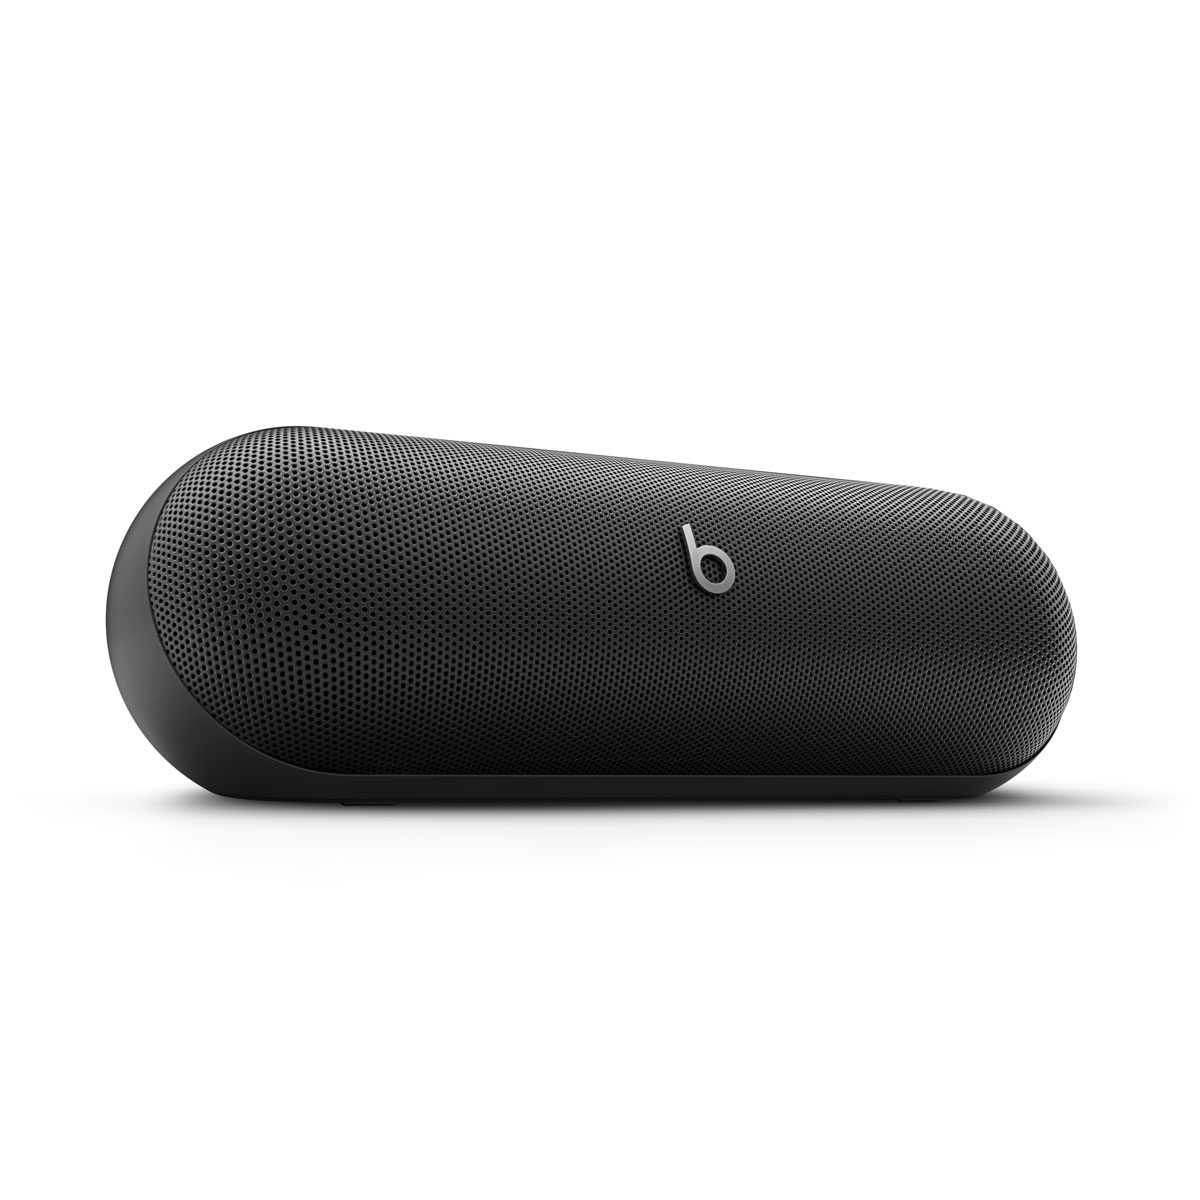 Apple Officially Releases New Beats Pill Speaker [Video]